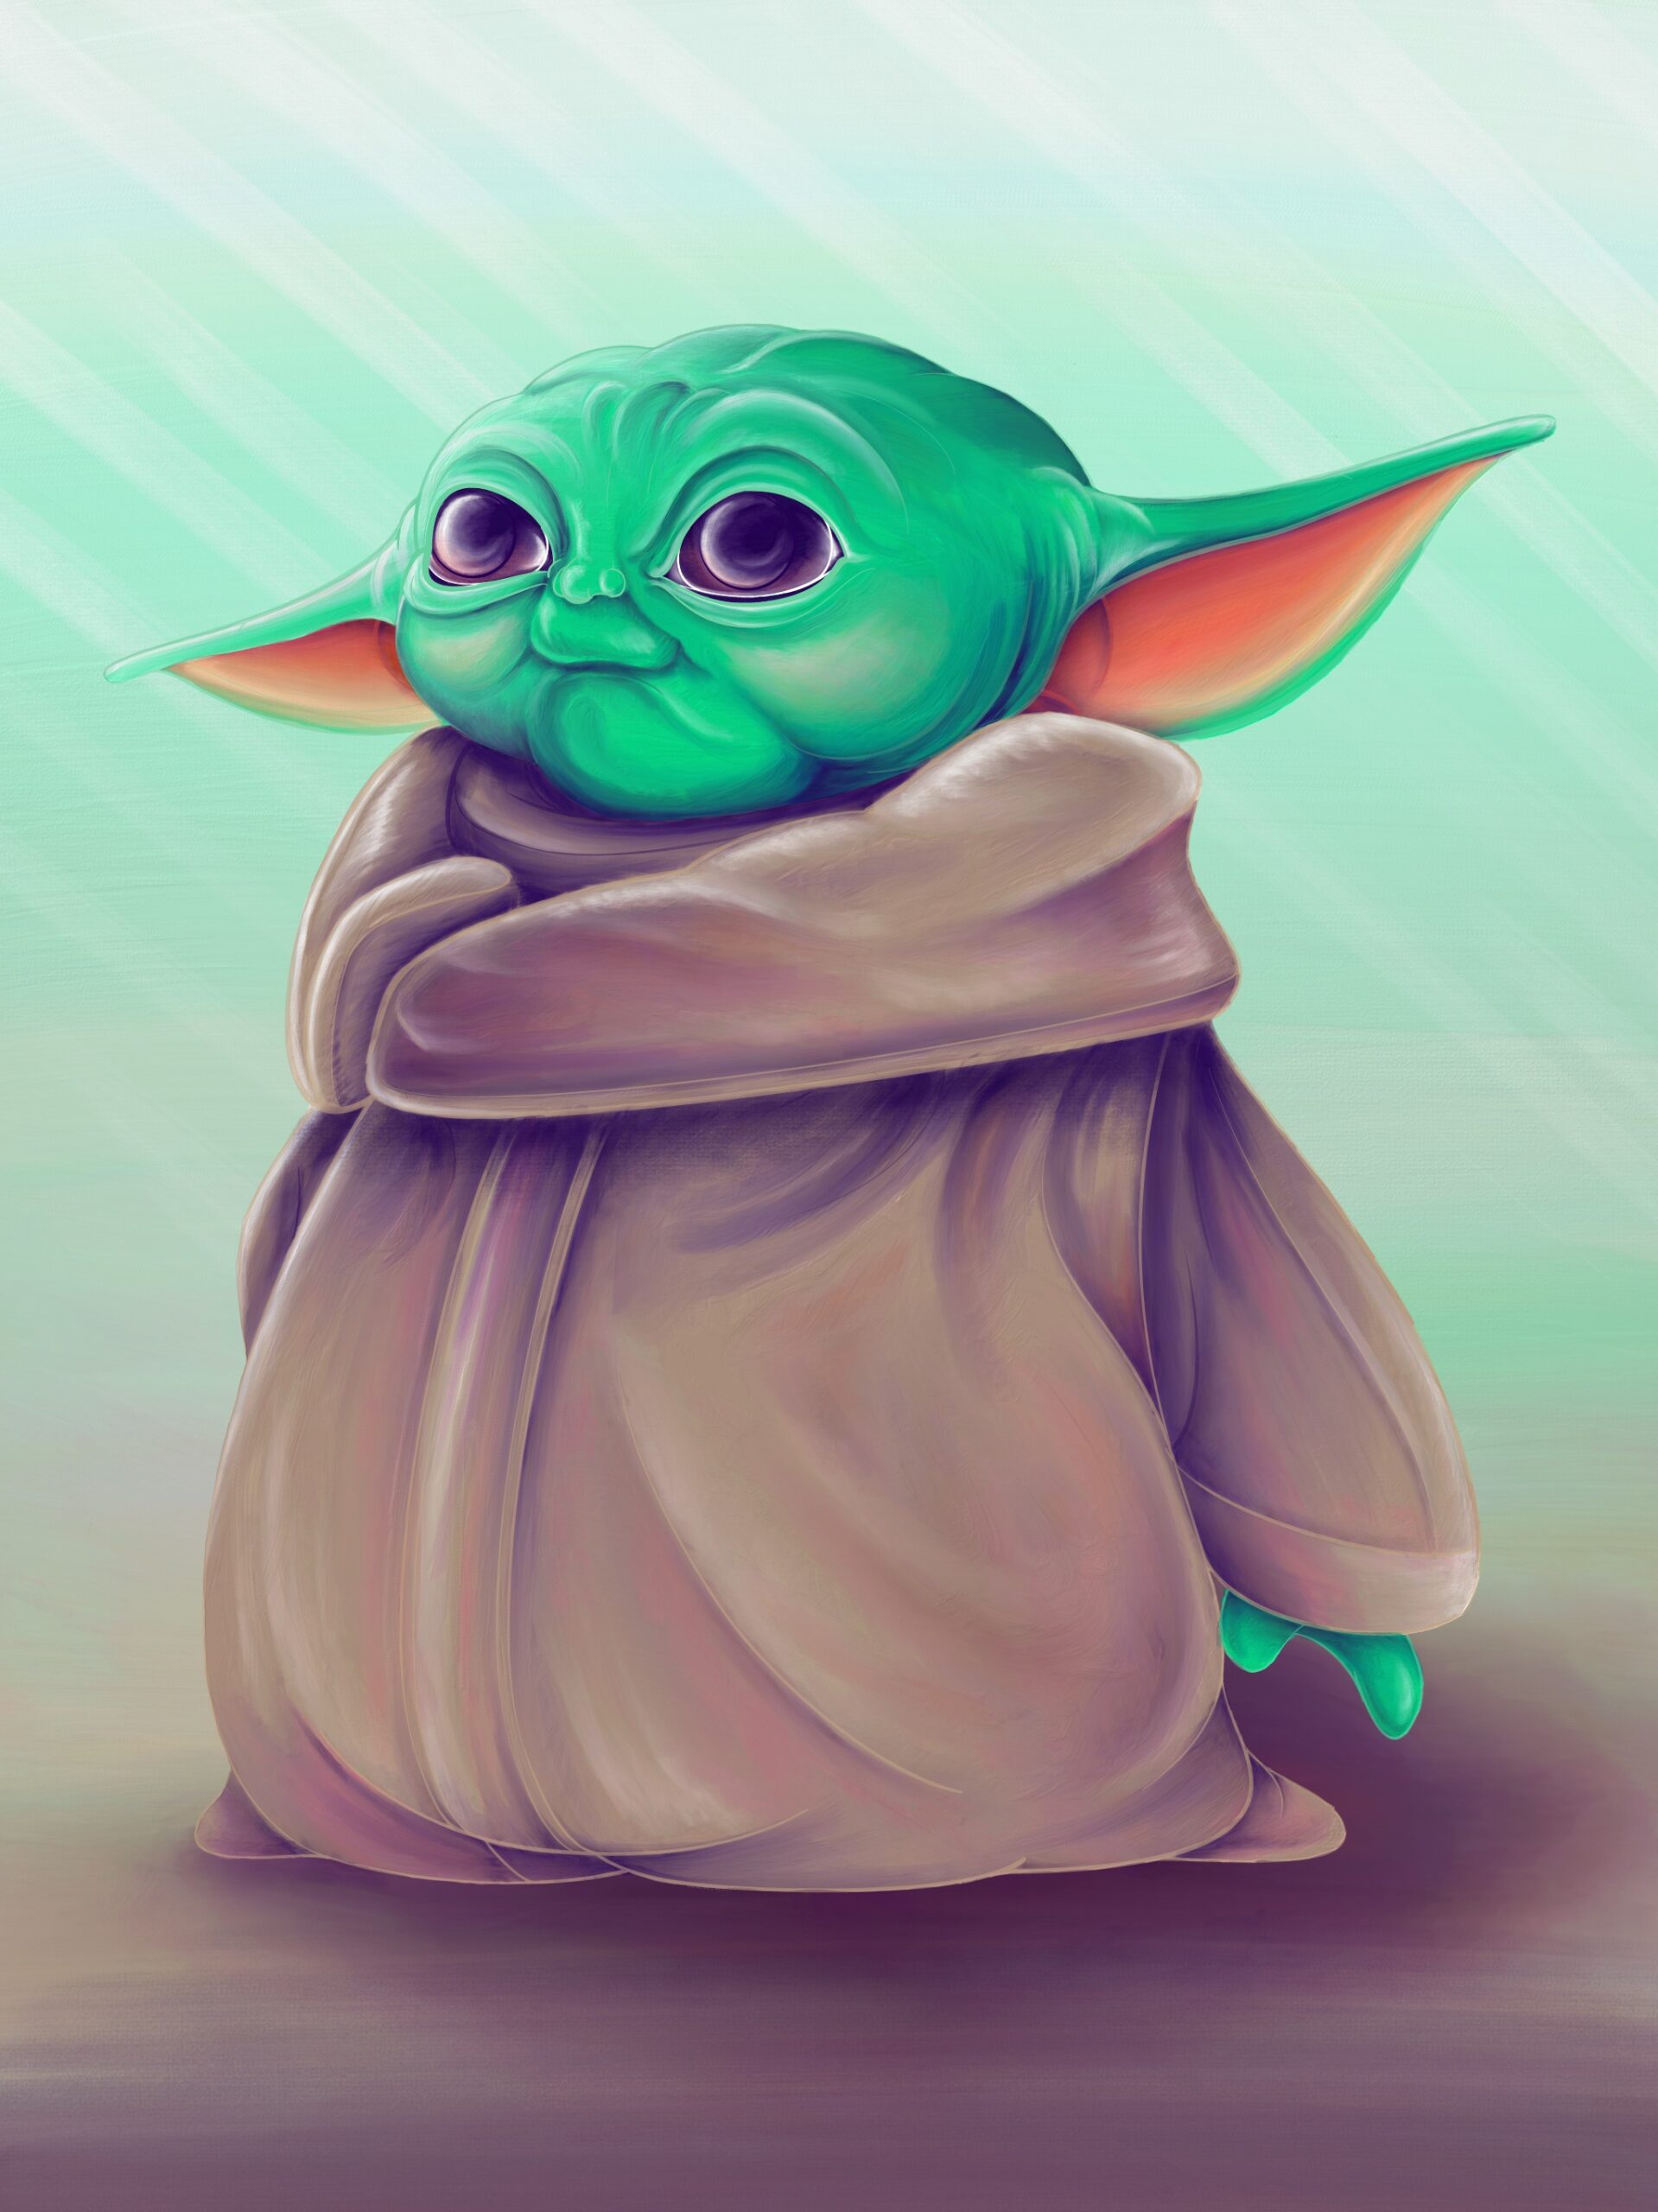 Digital painting of baby Yoda int he style of an oil painting.